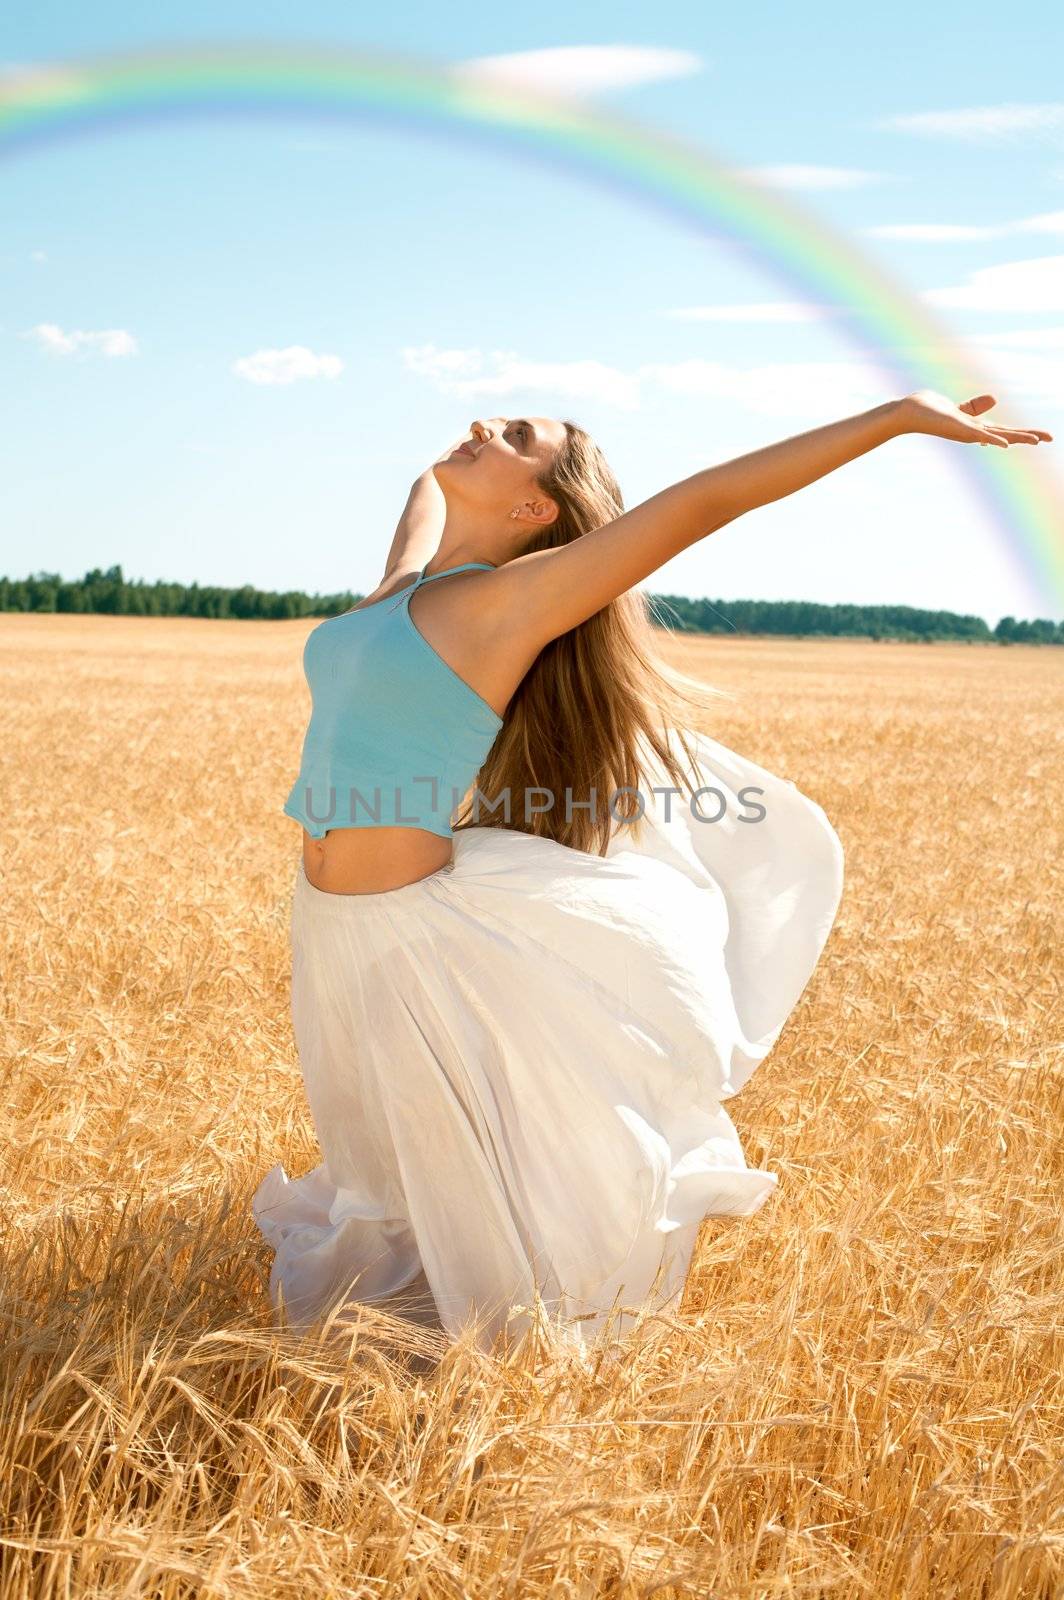 fit girl working out at the field under rainbow